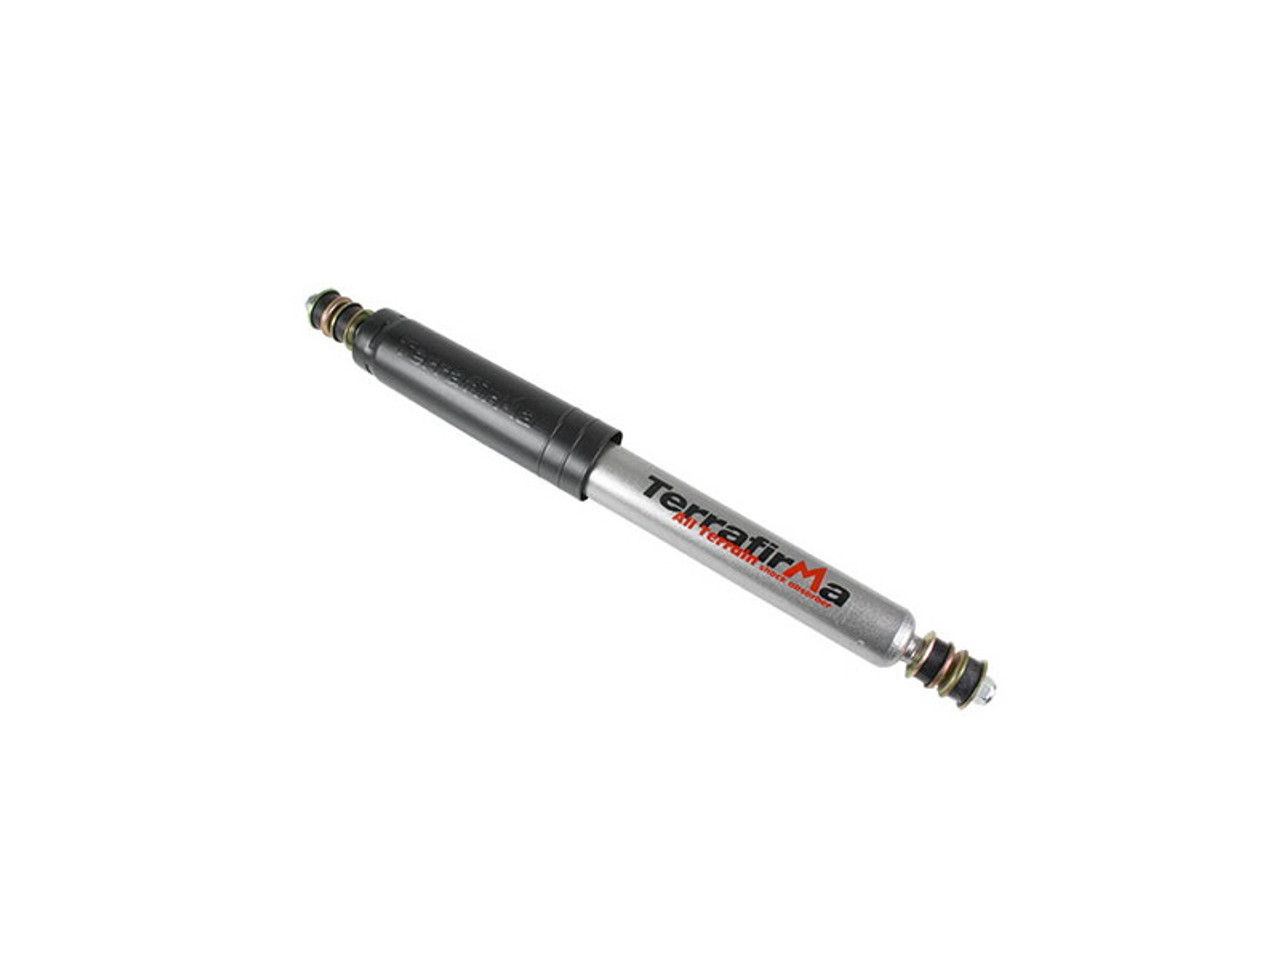 Terrafirma All Terrain Front Shock for Defender, Discovery 1 And Range Rover Classic - TF116